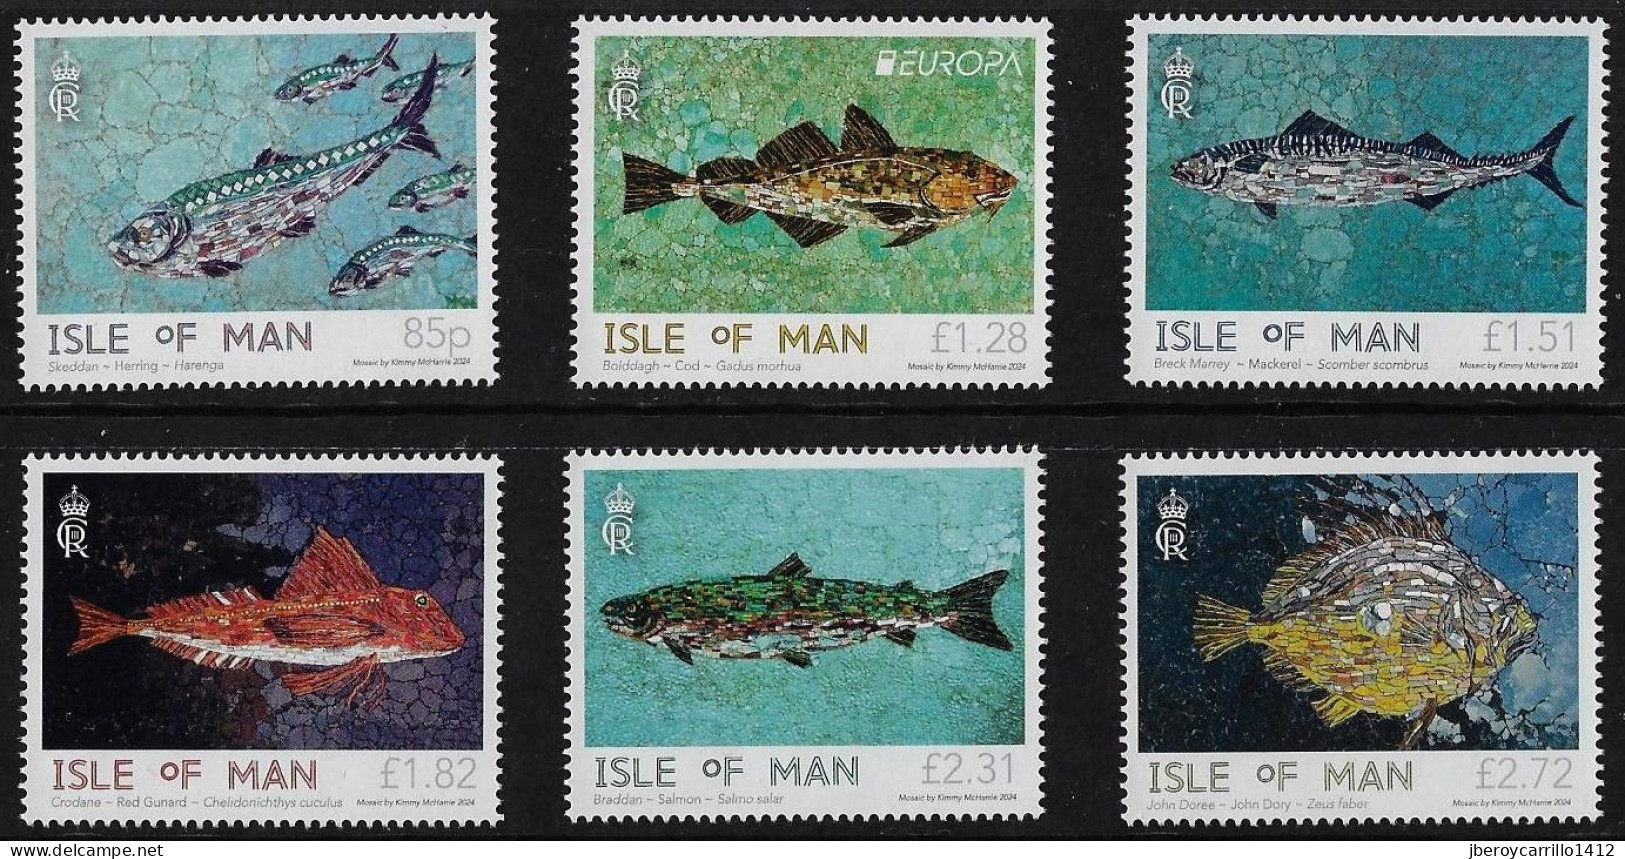 MAN /ISLE Of MAN /INSEL MAN  - EUROPA 2024 -"UNDERWATER FLORA And FAUNA".- COMPLETE SET Of 6 STAMPS - N - 2024